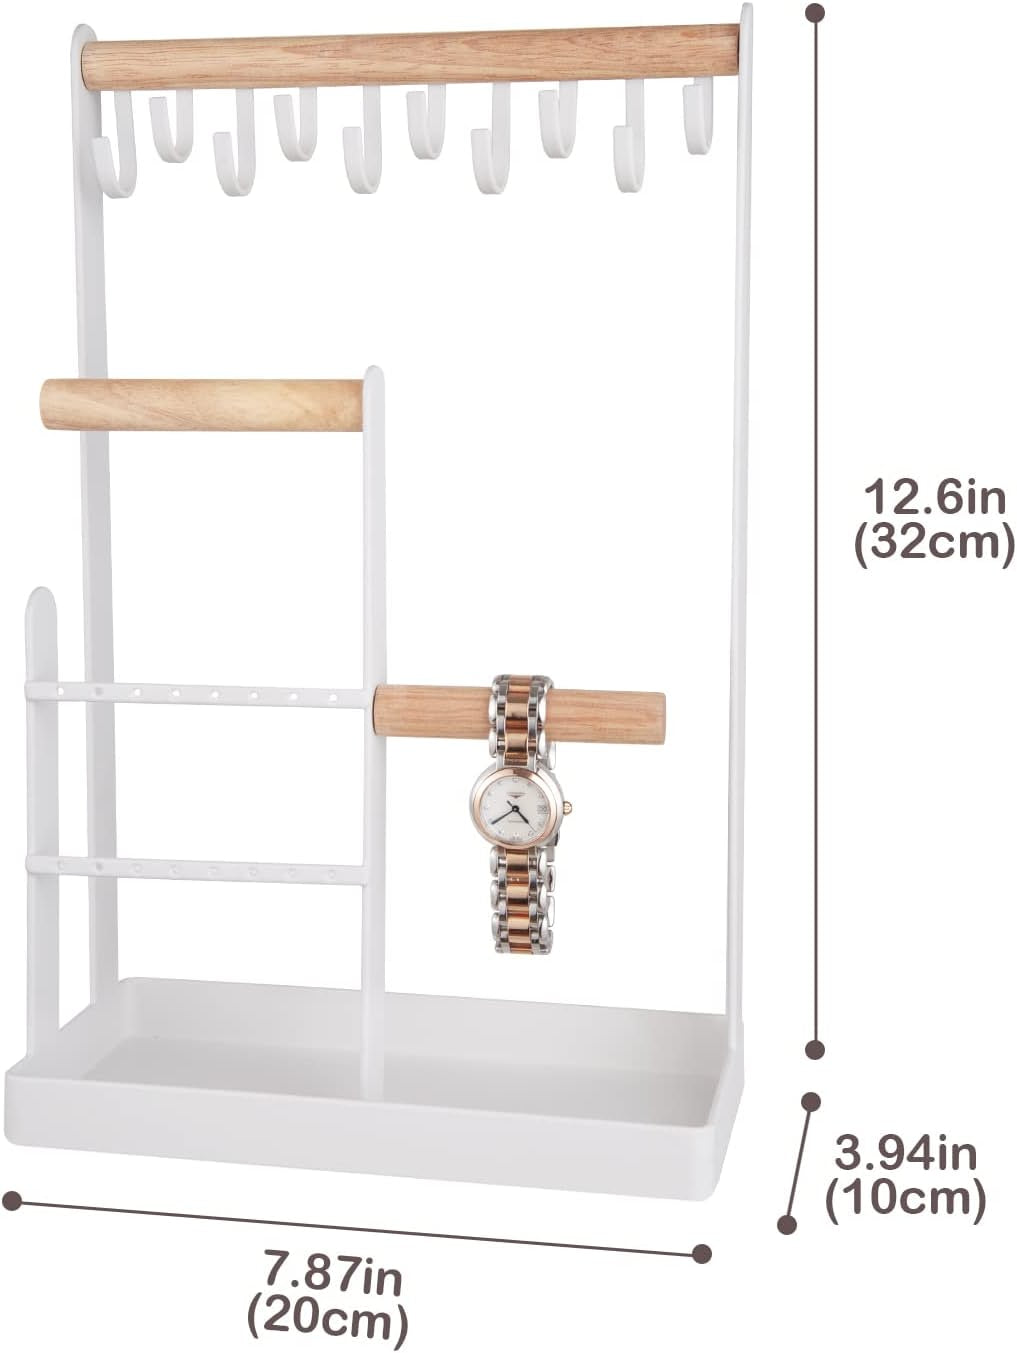 Jewelry Organizer Stand Necklace Holder, 4-Tier Jewelry Tower Rack with Earring Tray and Holes, 10 Hooks Necklaces Hanging Storage Tree Display for Bracelets Watches Earrings Rings -White